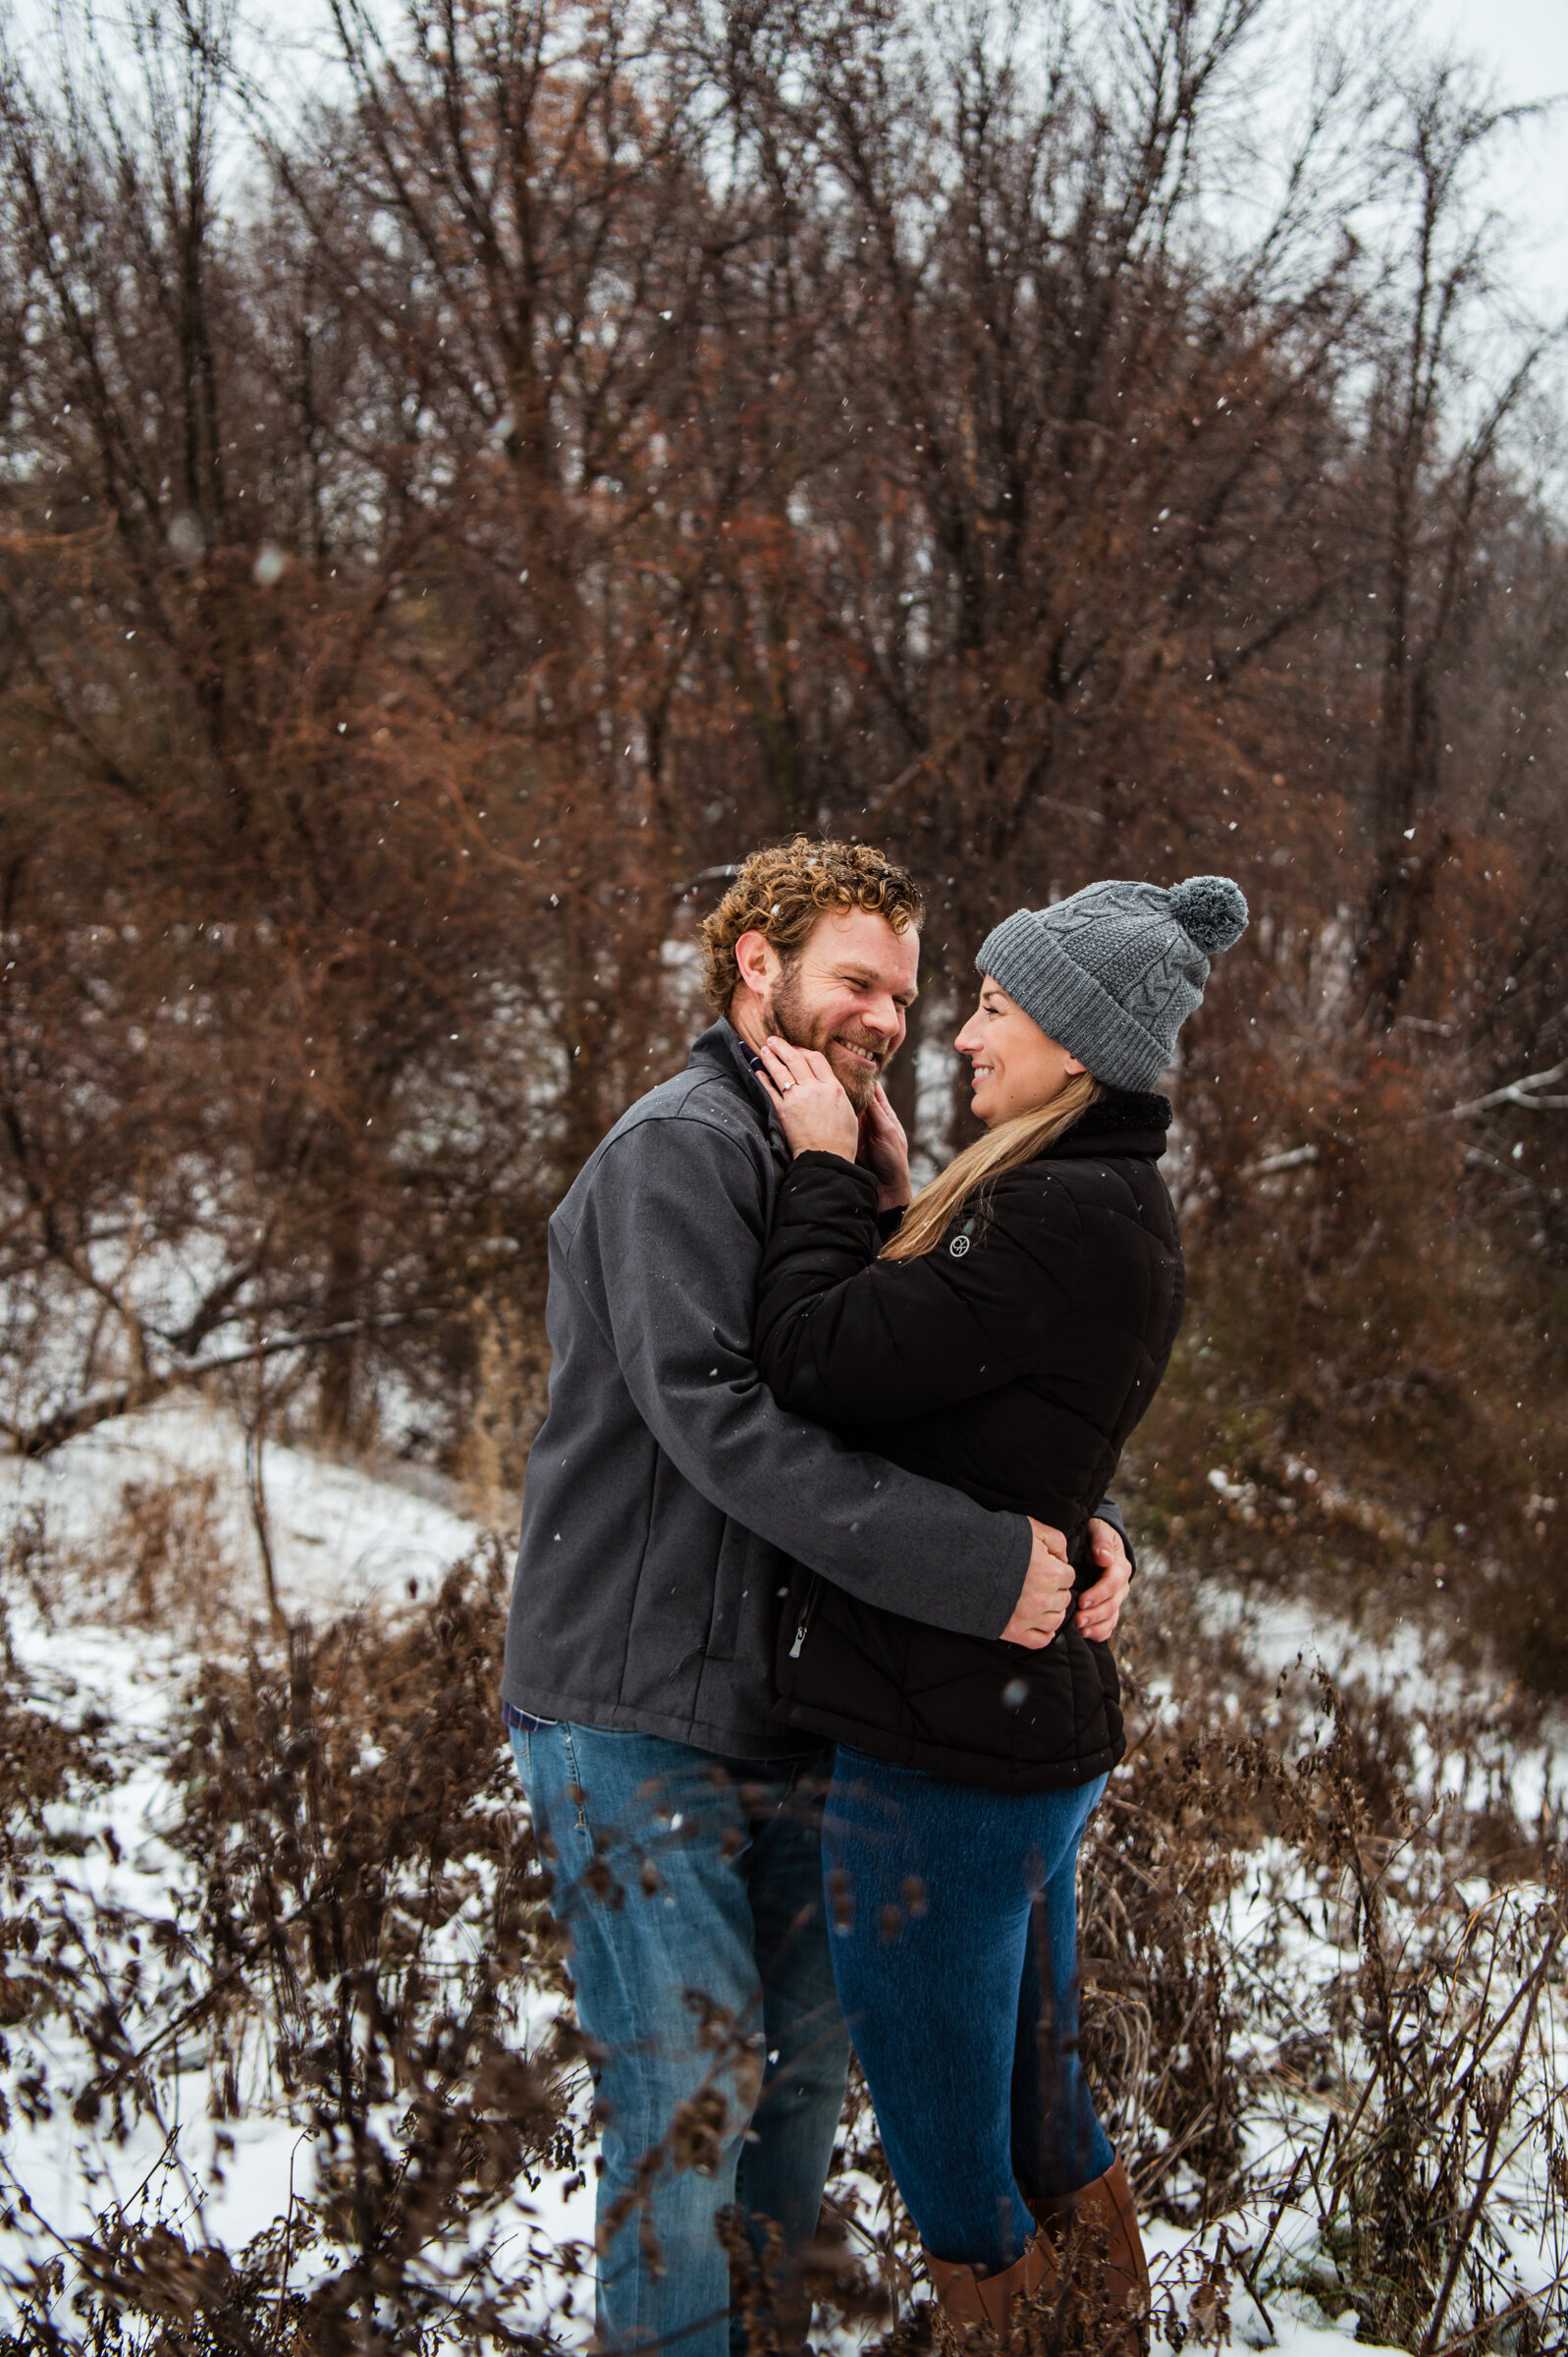 Irondequoit_Beer_Company_Durand_Eastman_Park_Rochester_Engagement_Session_JILL_STUDIO_Rochester_NY_Photographer_7226.jpg